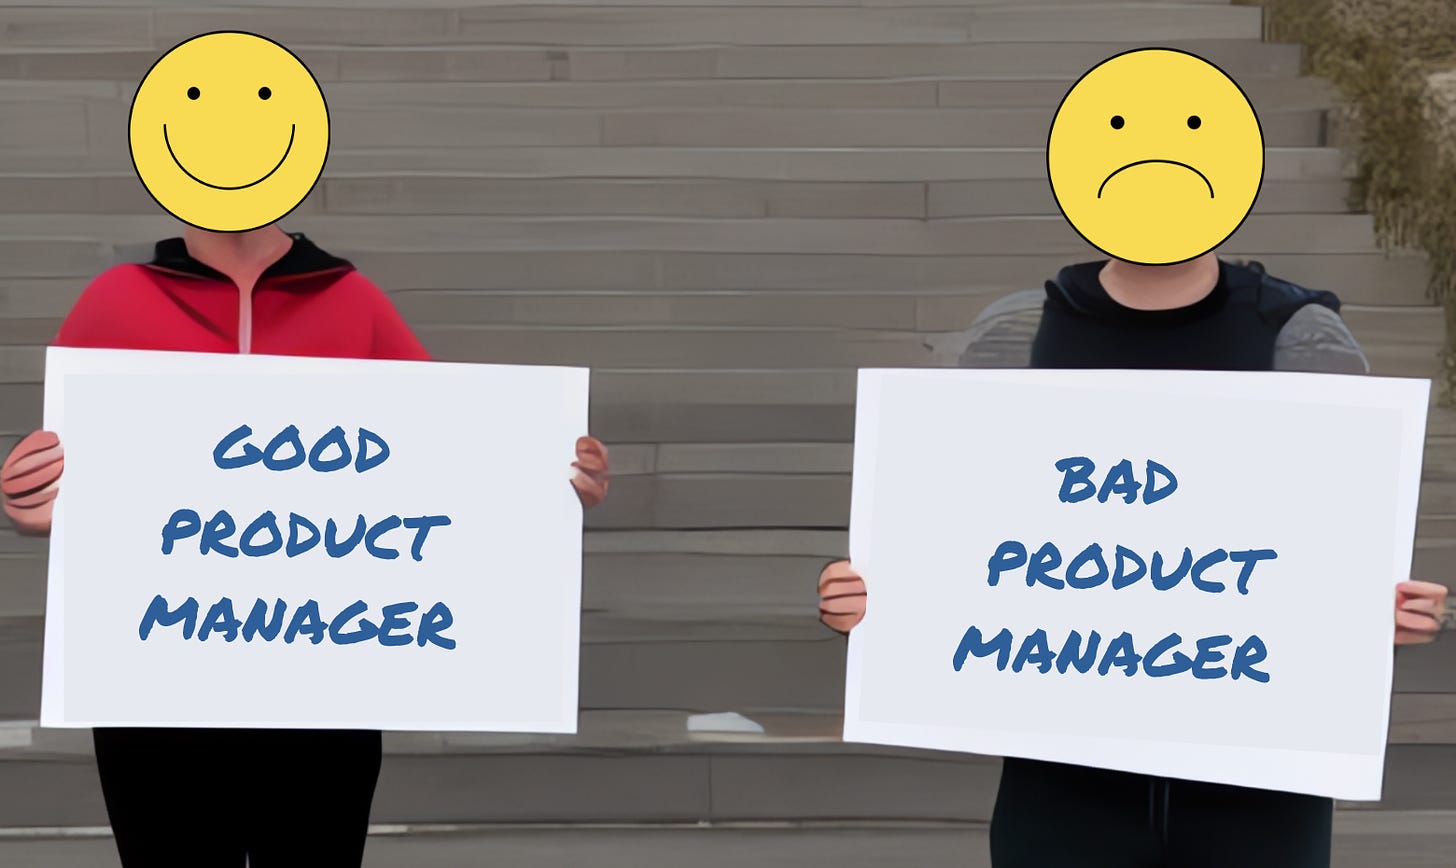 A Happy Good Product Manager vs a Sad Bad product Manager